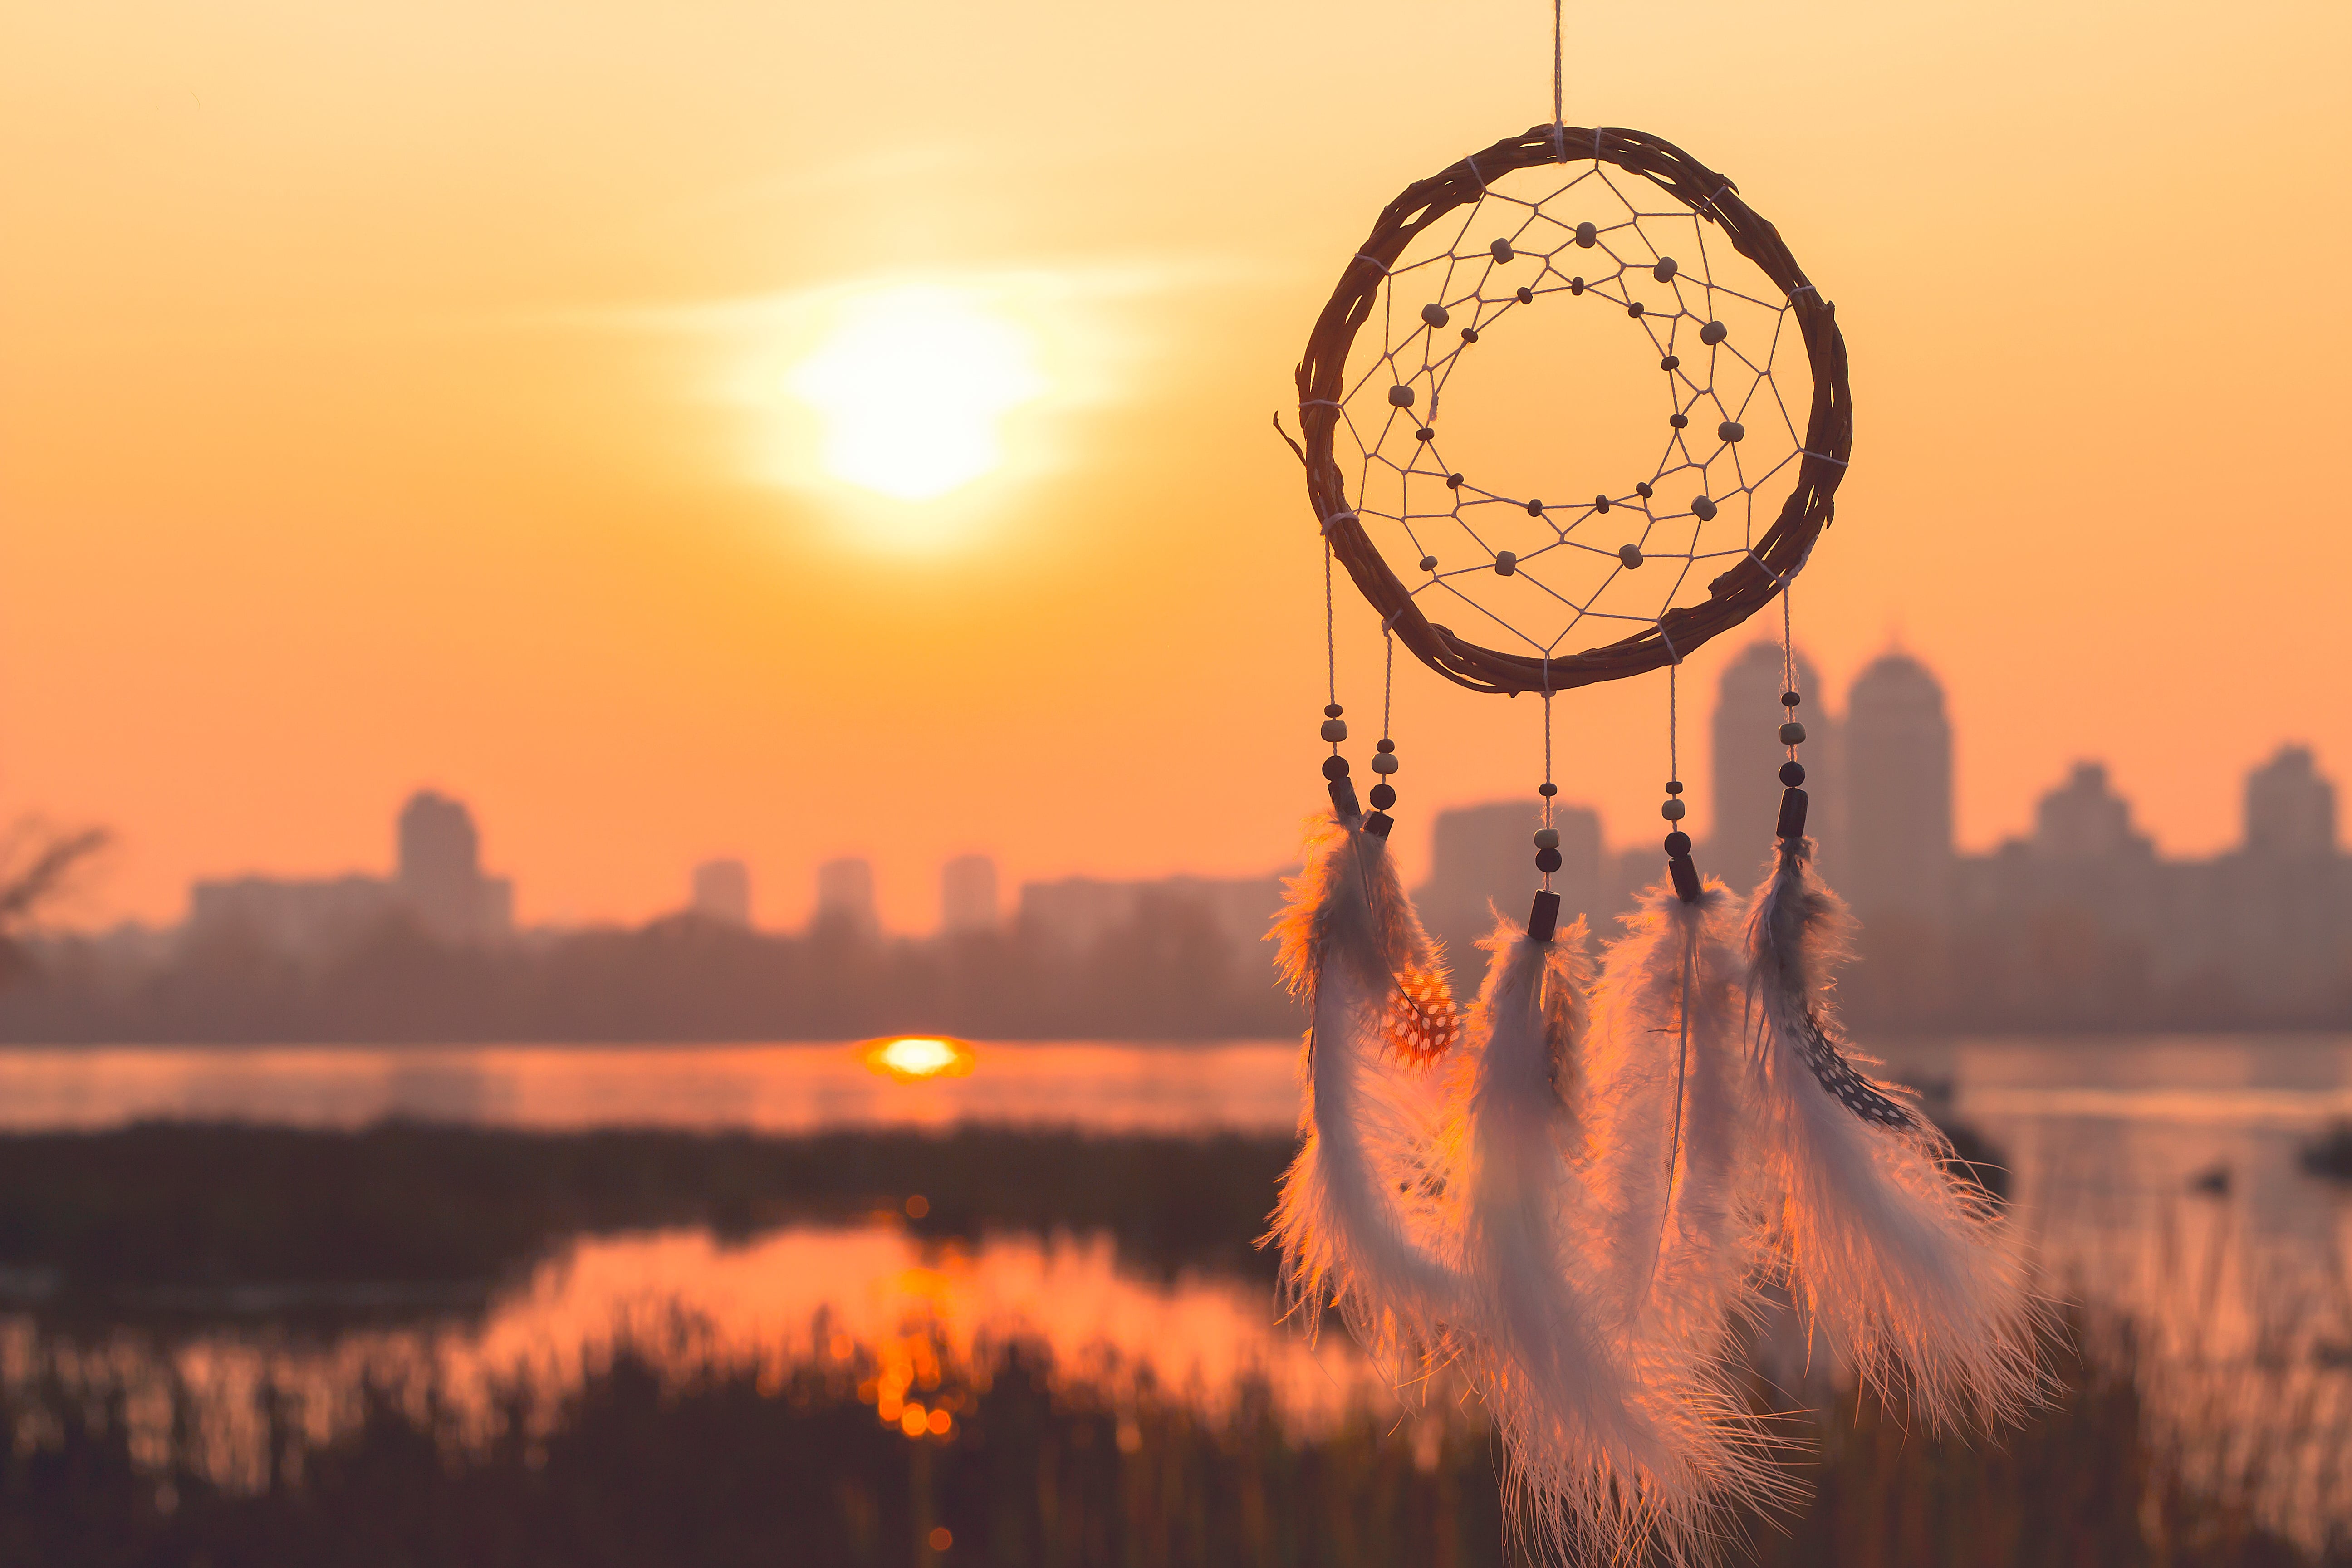 A dream catcher silhouetted against a cityscape at sunset.